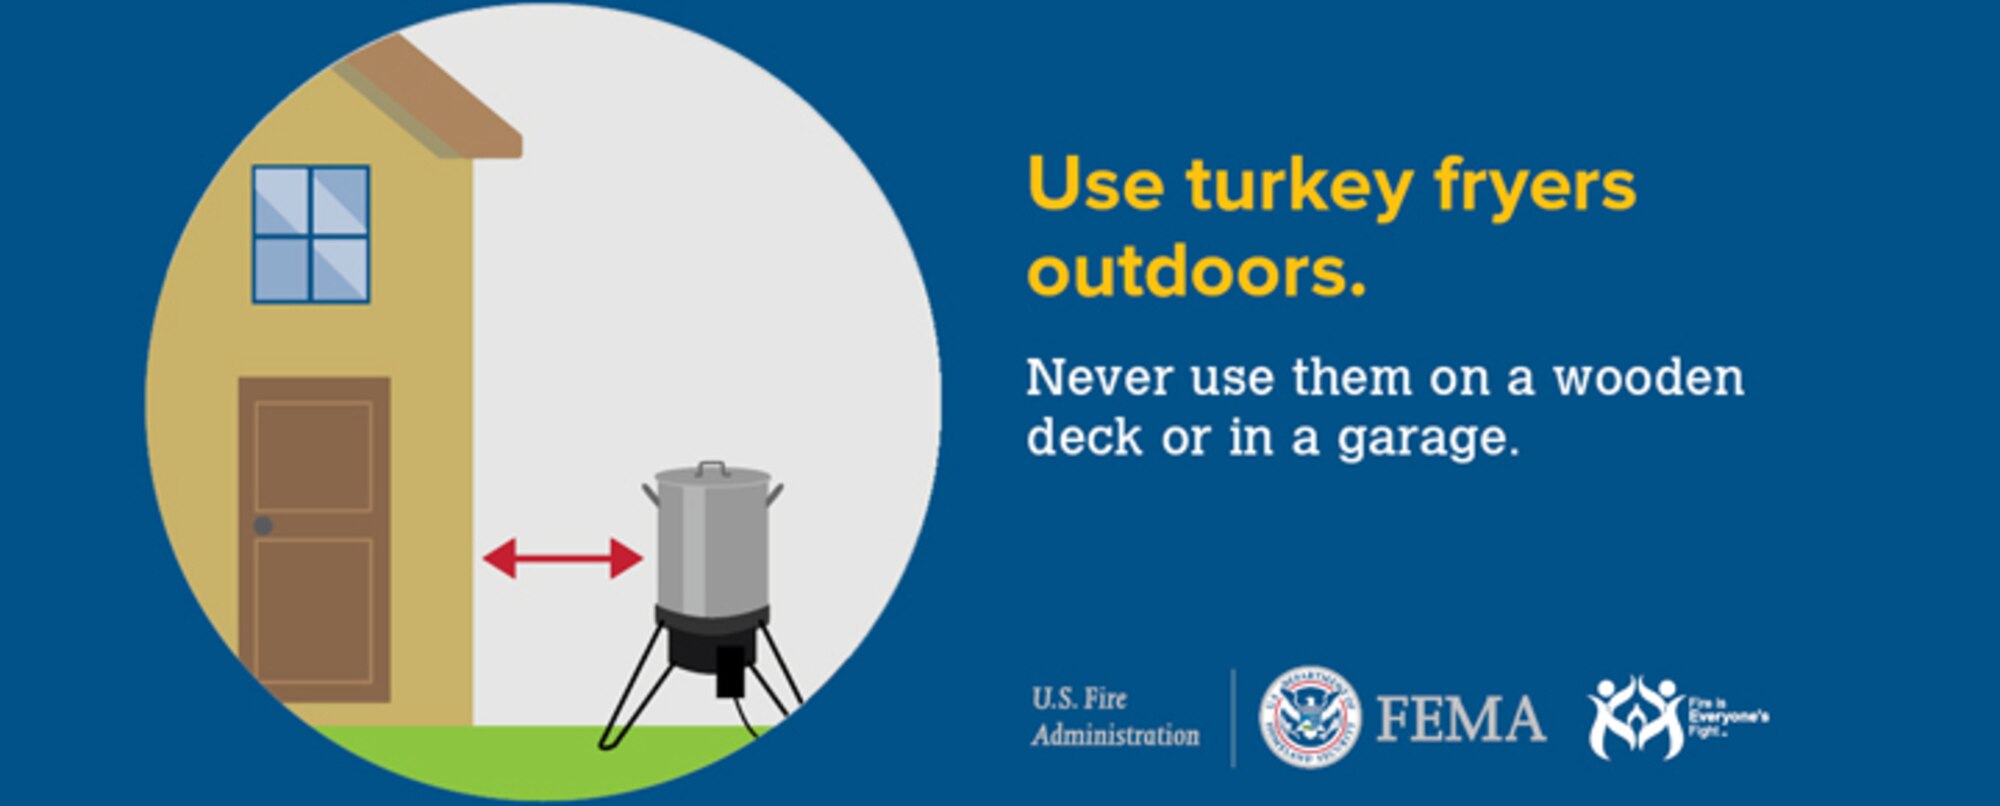 Giving thanks and spending a day with loved ones, friends, and neighbors is what this holiday is all about, but the Thanksgiving meal can lead to fires from the cooking process.